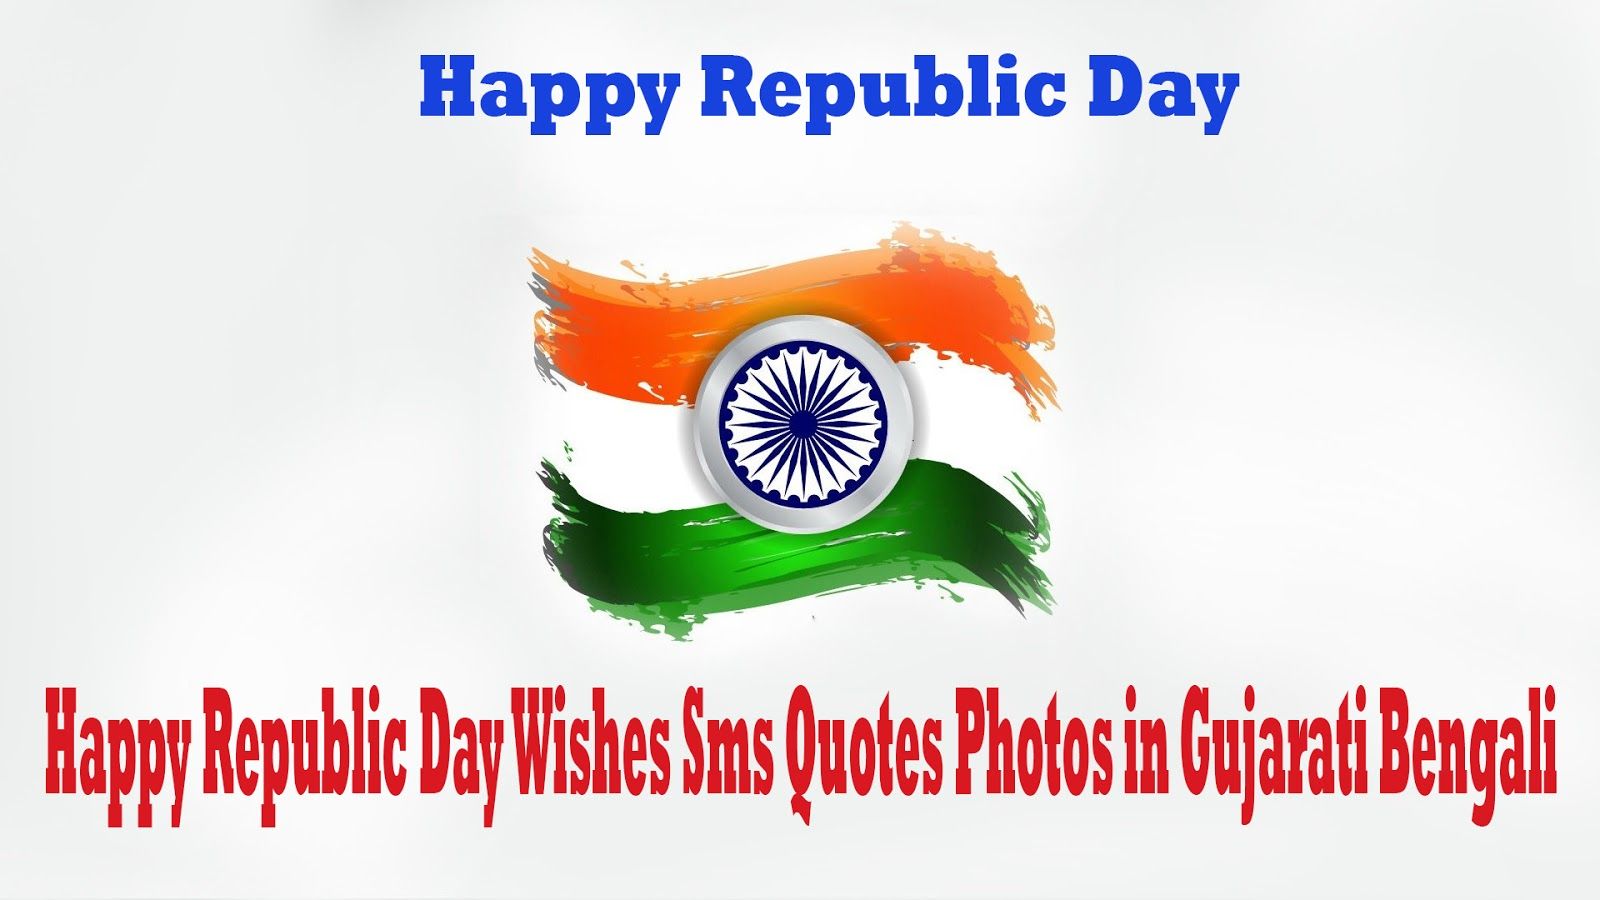 Happy Republic Day 2021 Wishes Sms Quotes Photo in Gujarati Bengali Happy Republic Day 2021 Image, Quotes, Speech, Poems, Slogans